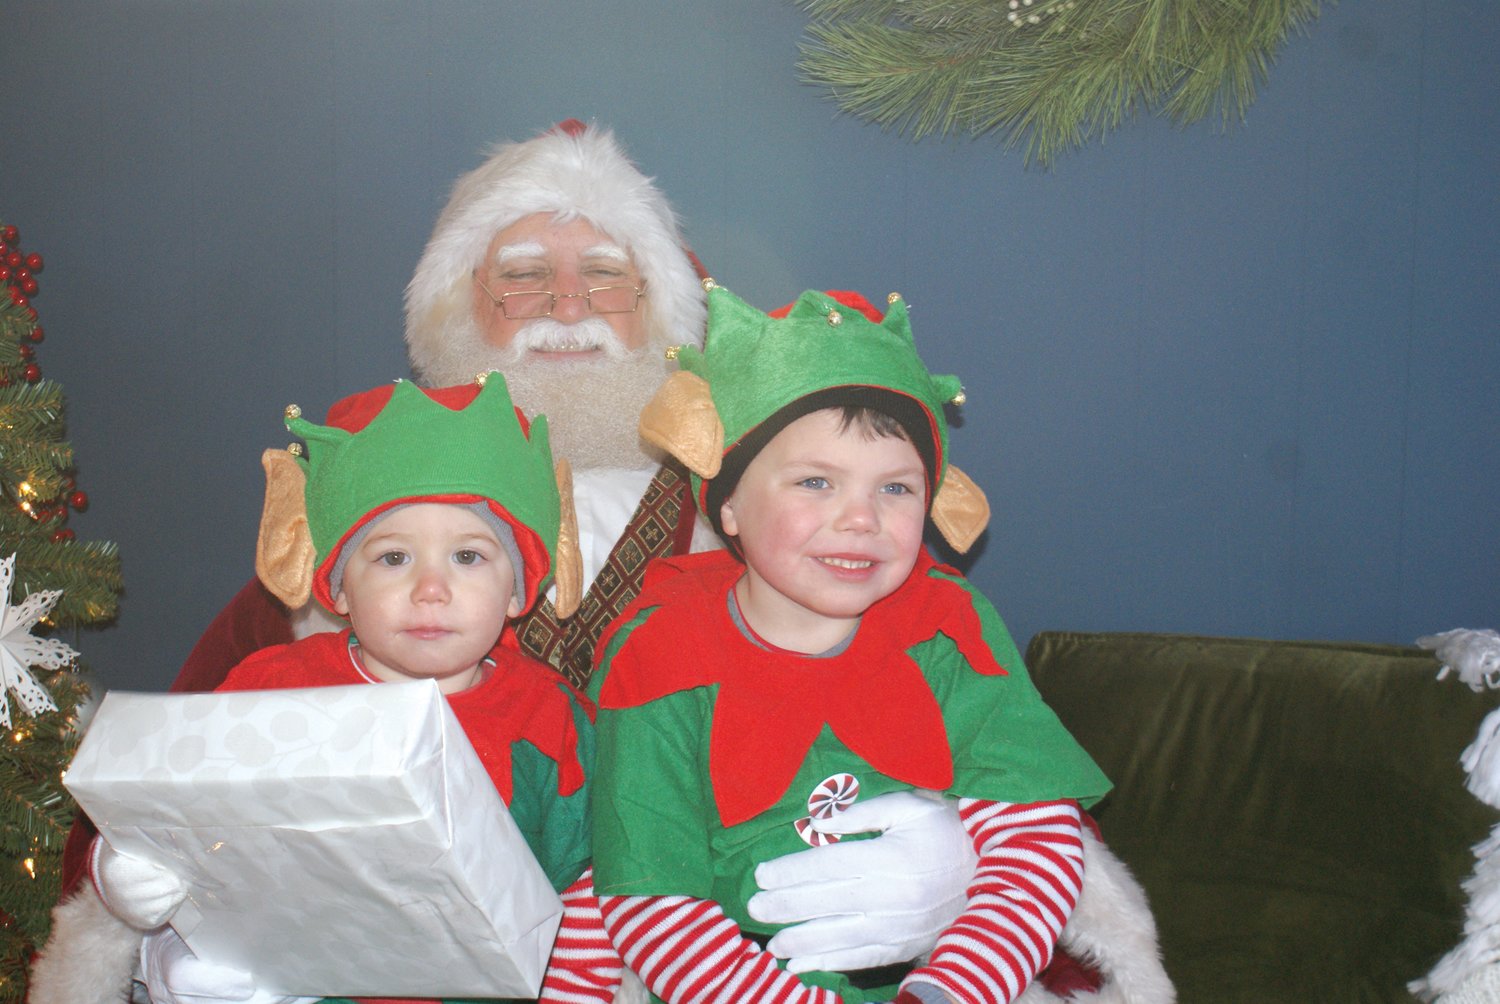 ELVES WITH SANTA: Santa Claus was excited to greet Elf Isaac an Elf Anthony during his Grand Entrance into Garden City Center. His elves help Santa to greet the children. Santa Claus was so happy to return for the event since it was not held last year.